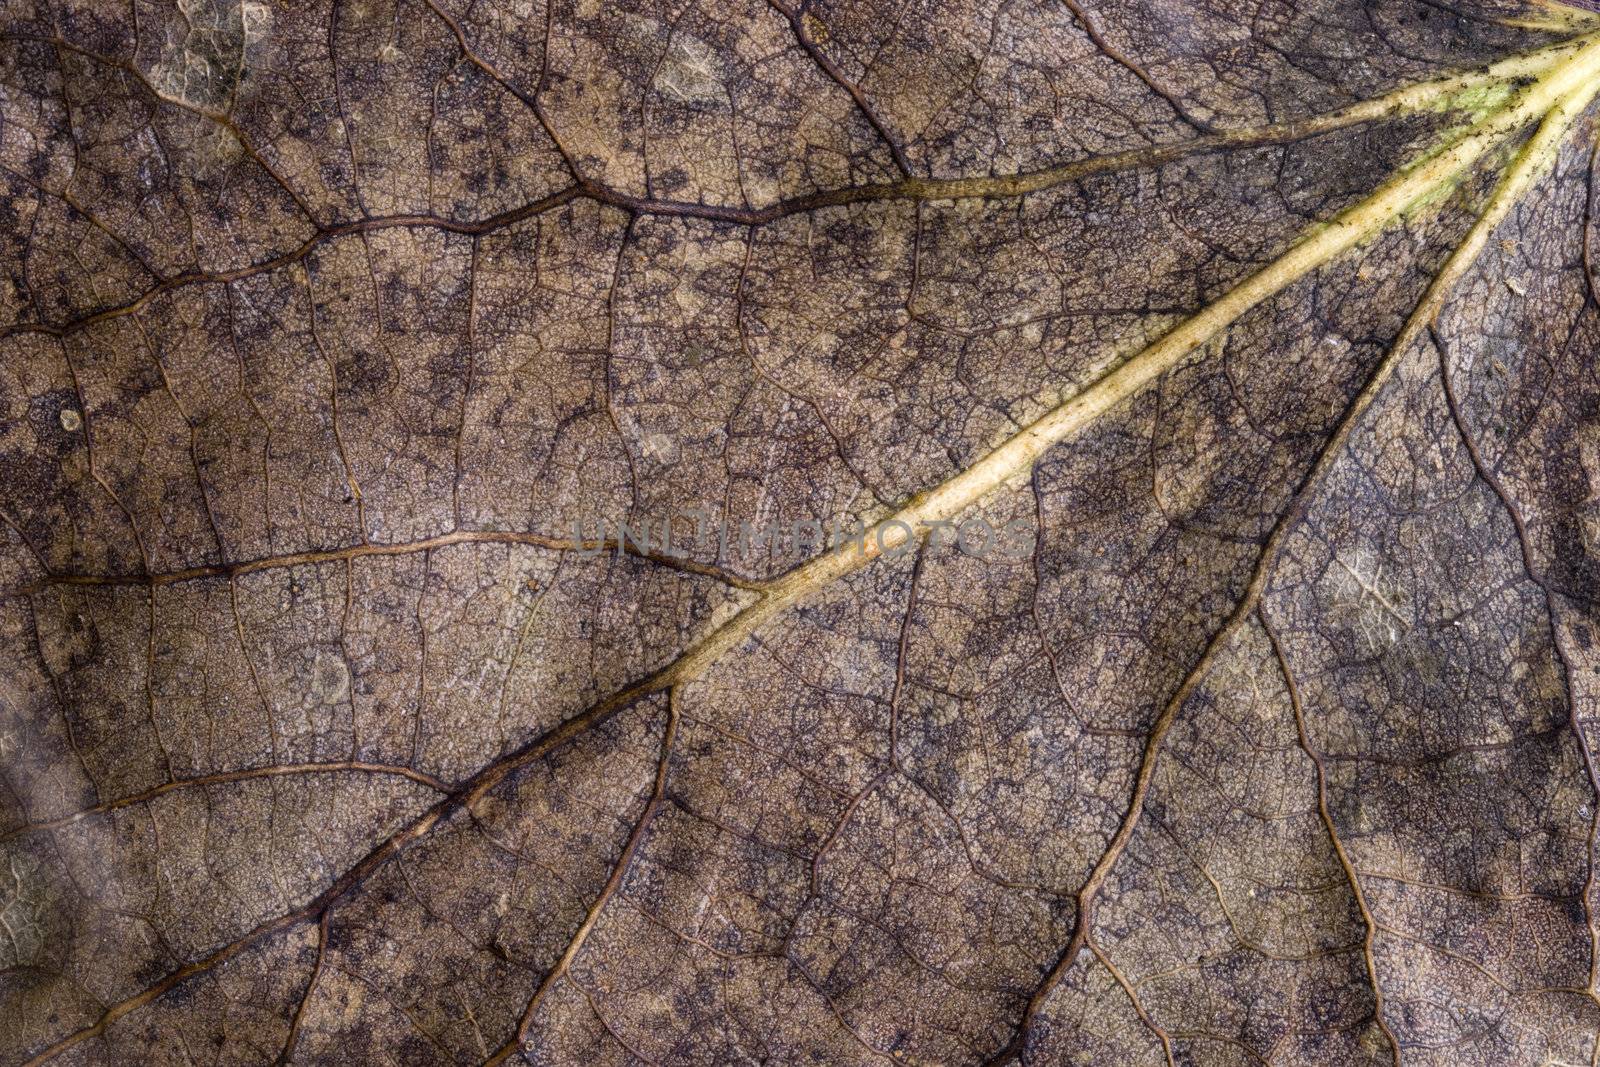 Almost Dead Leaf by ChrisBoswell